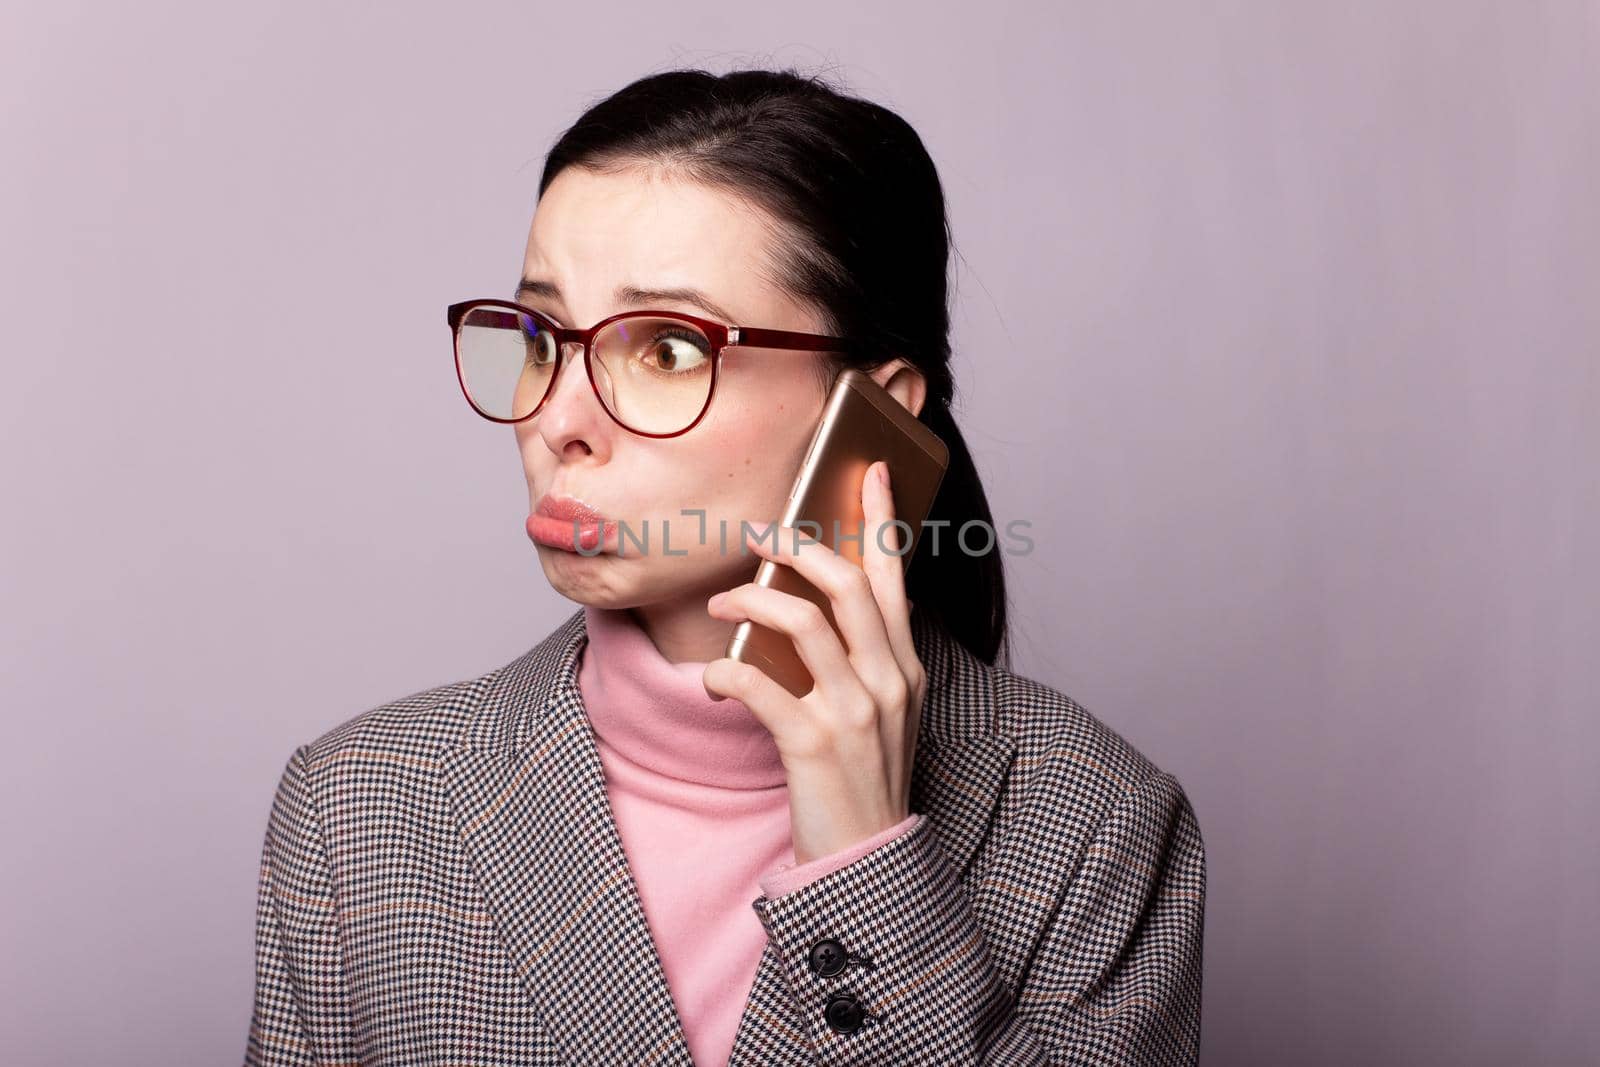 woman in a pink turtleneck, gray jacket, glasses for sight communicates on the phone on a gray background. High quality photo